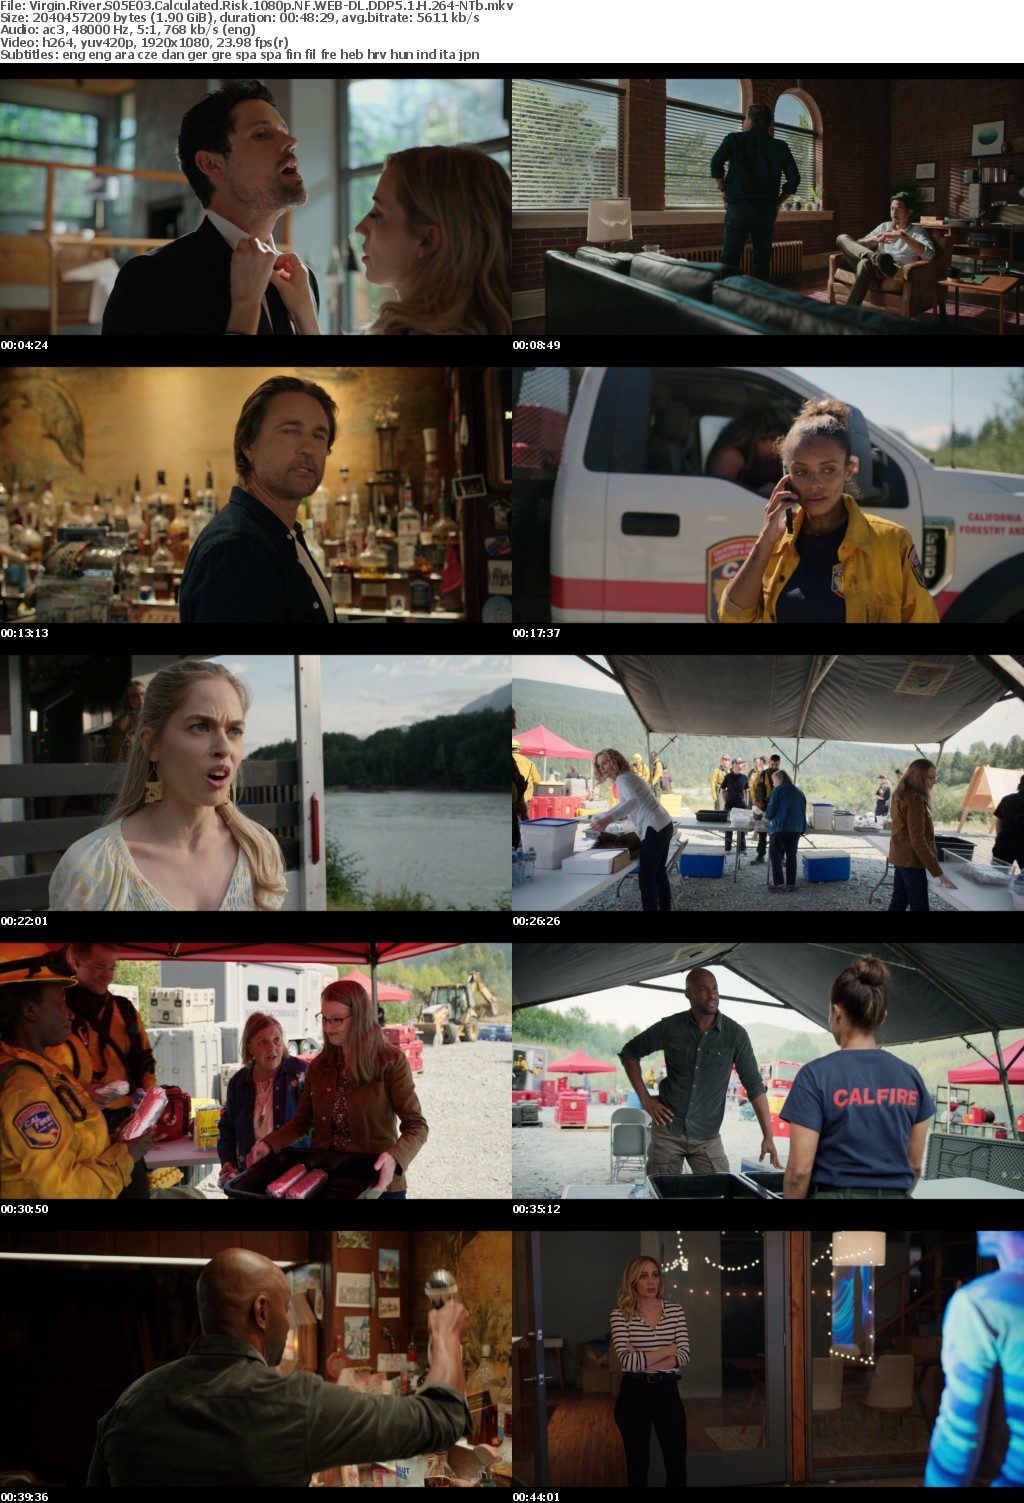 Virgin River S05E03 Calculated Risk 1080p NF WEB-DL DDP5 1 H 264-NTb